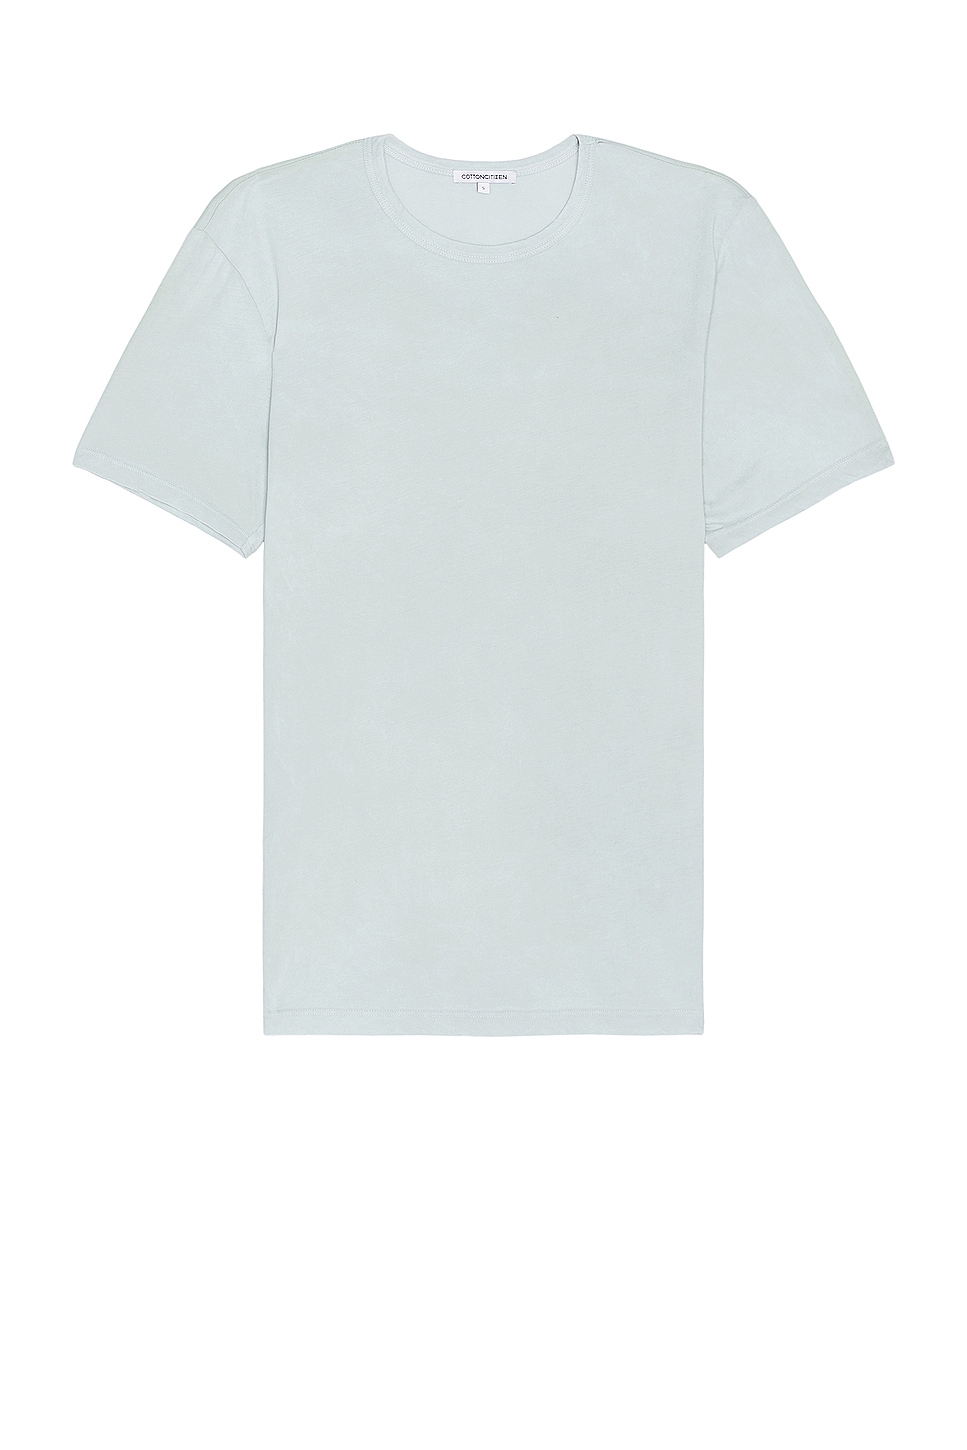 Image 1 of COTTON CITIZEN Classic Crew Tee in Vintage Sage